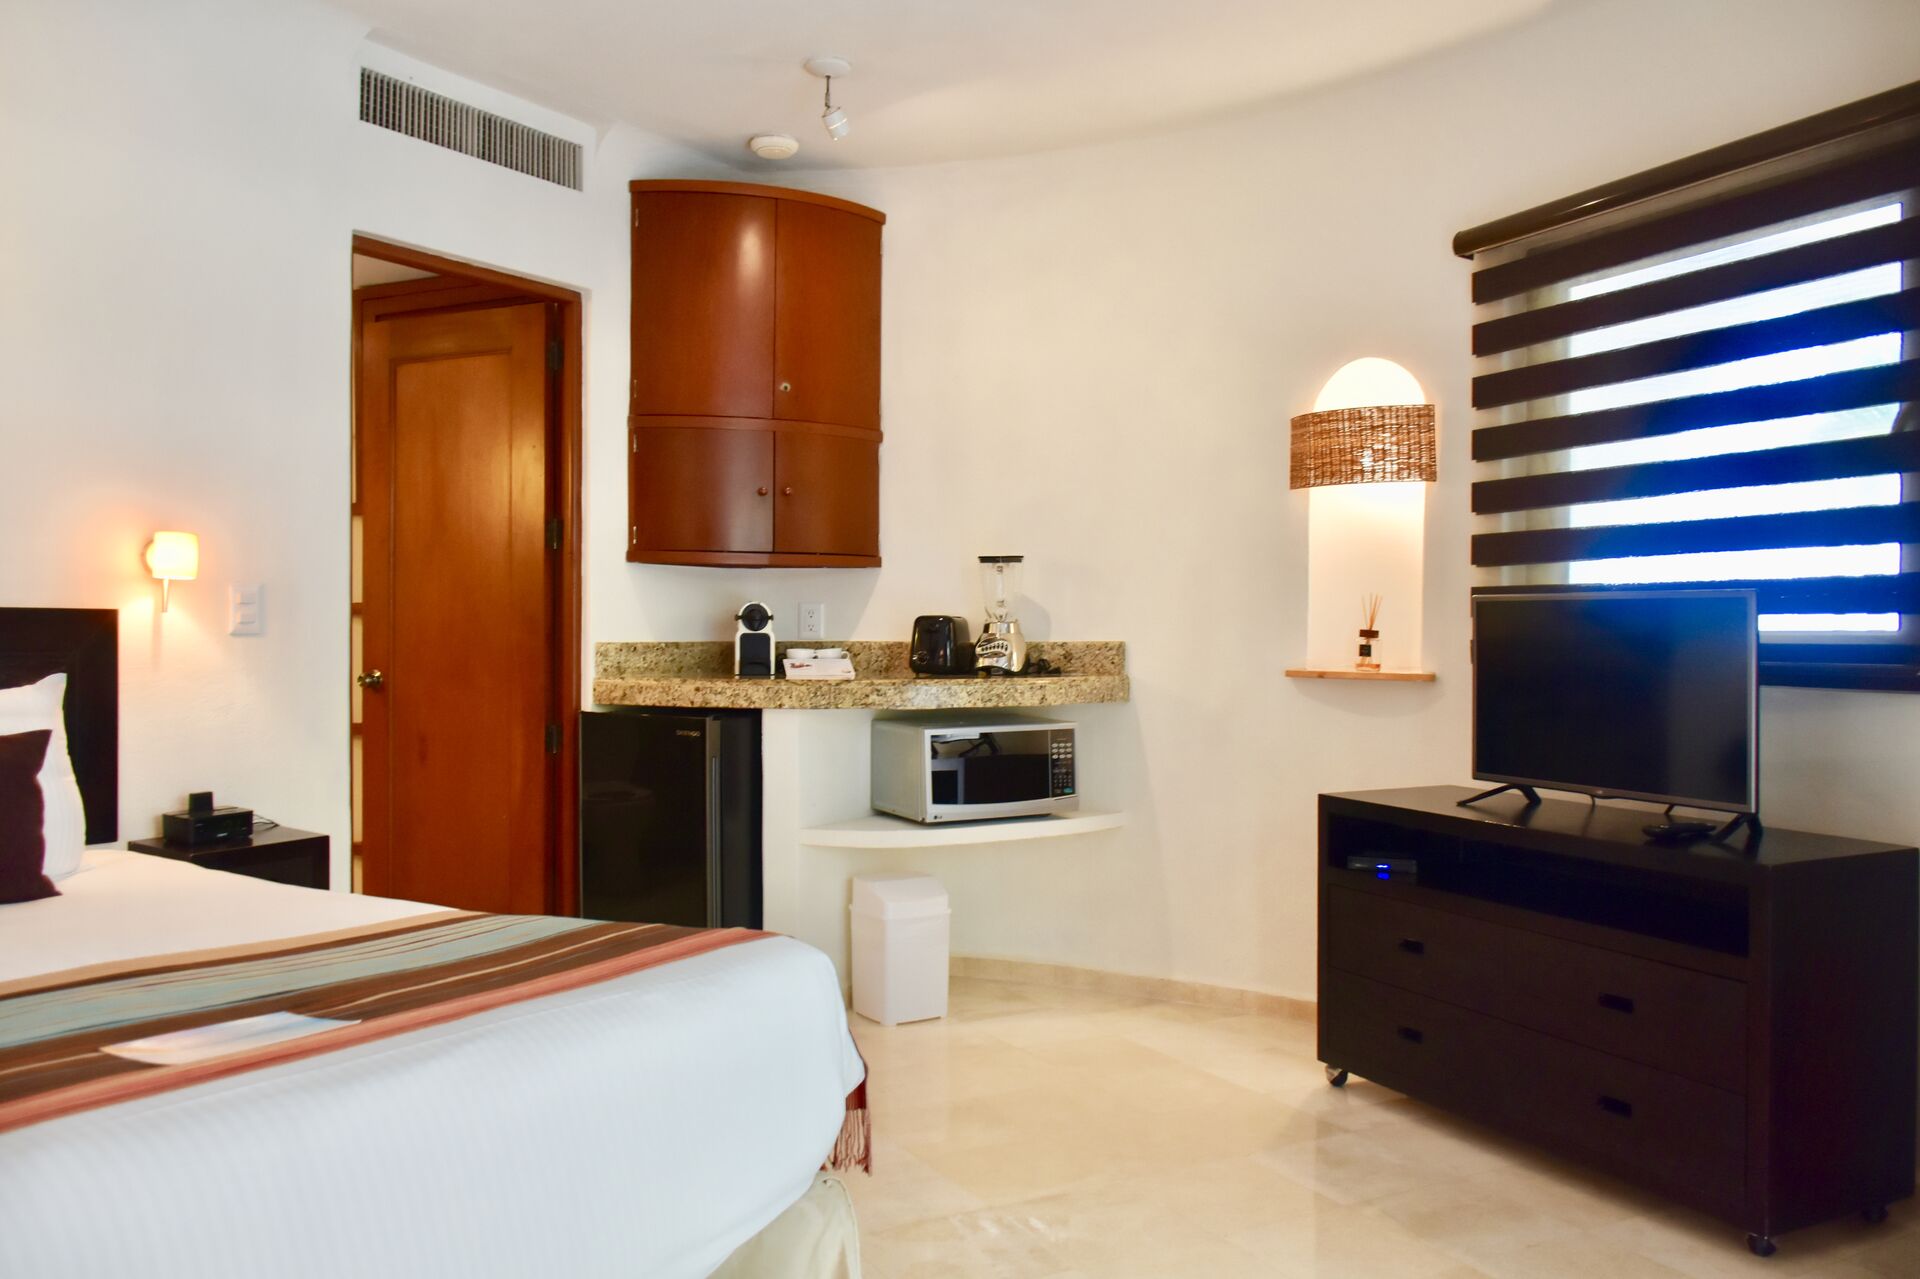 Spacious room with kitchenette.